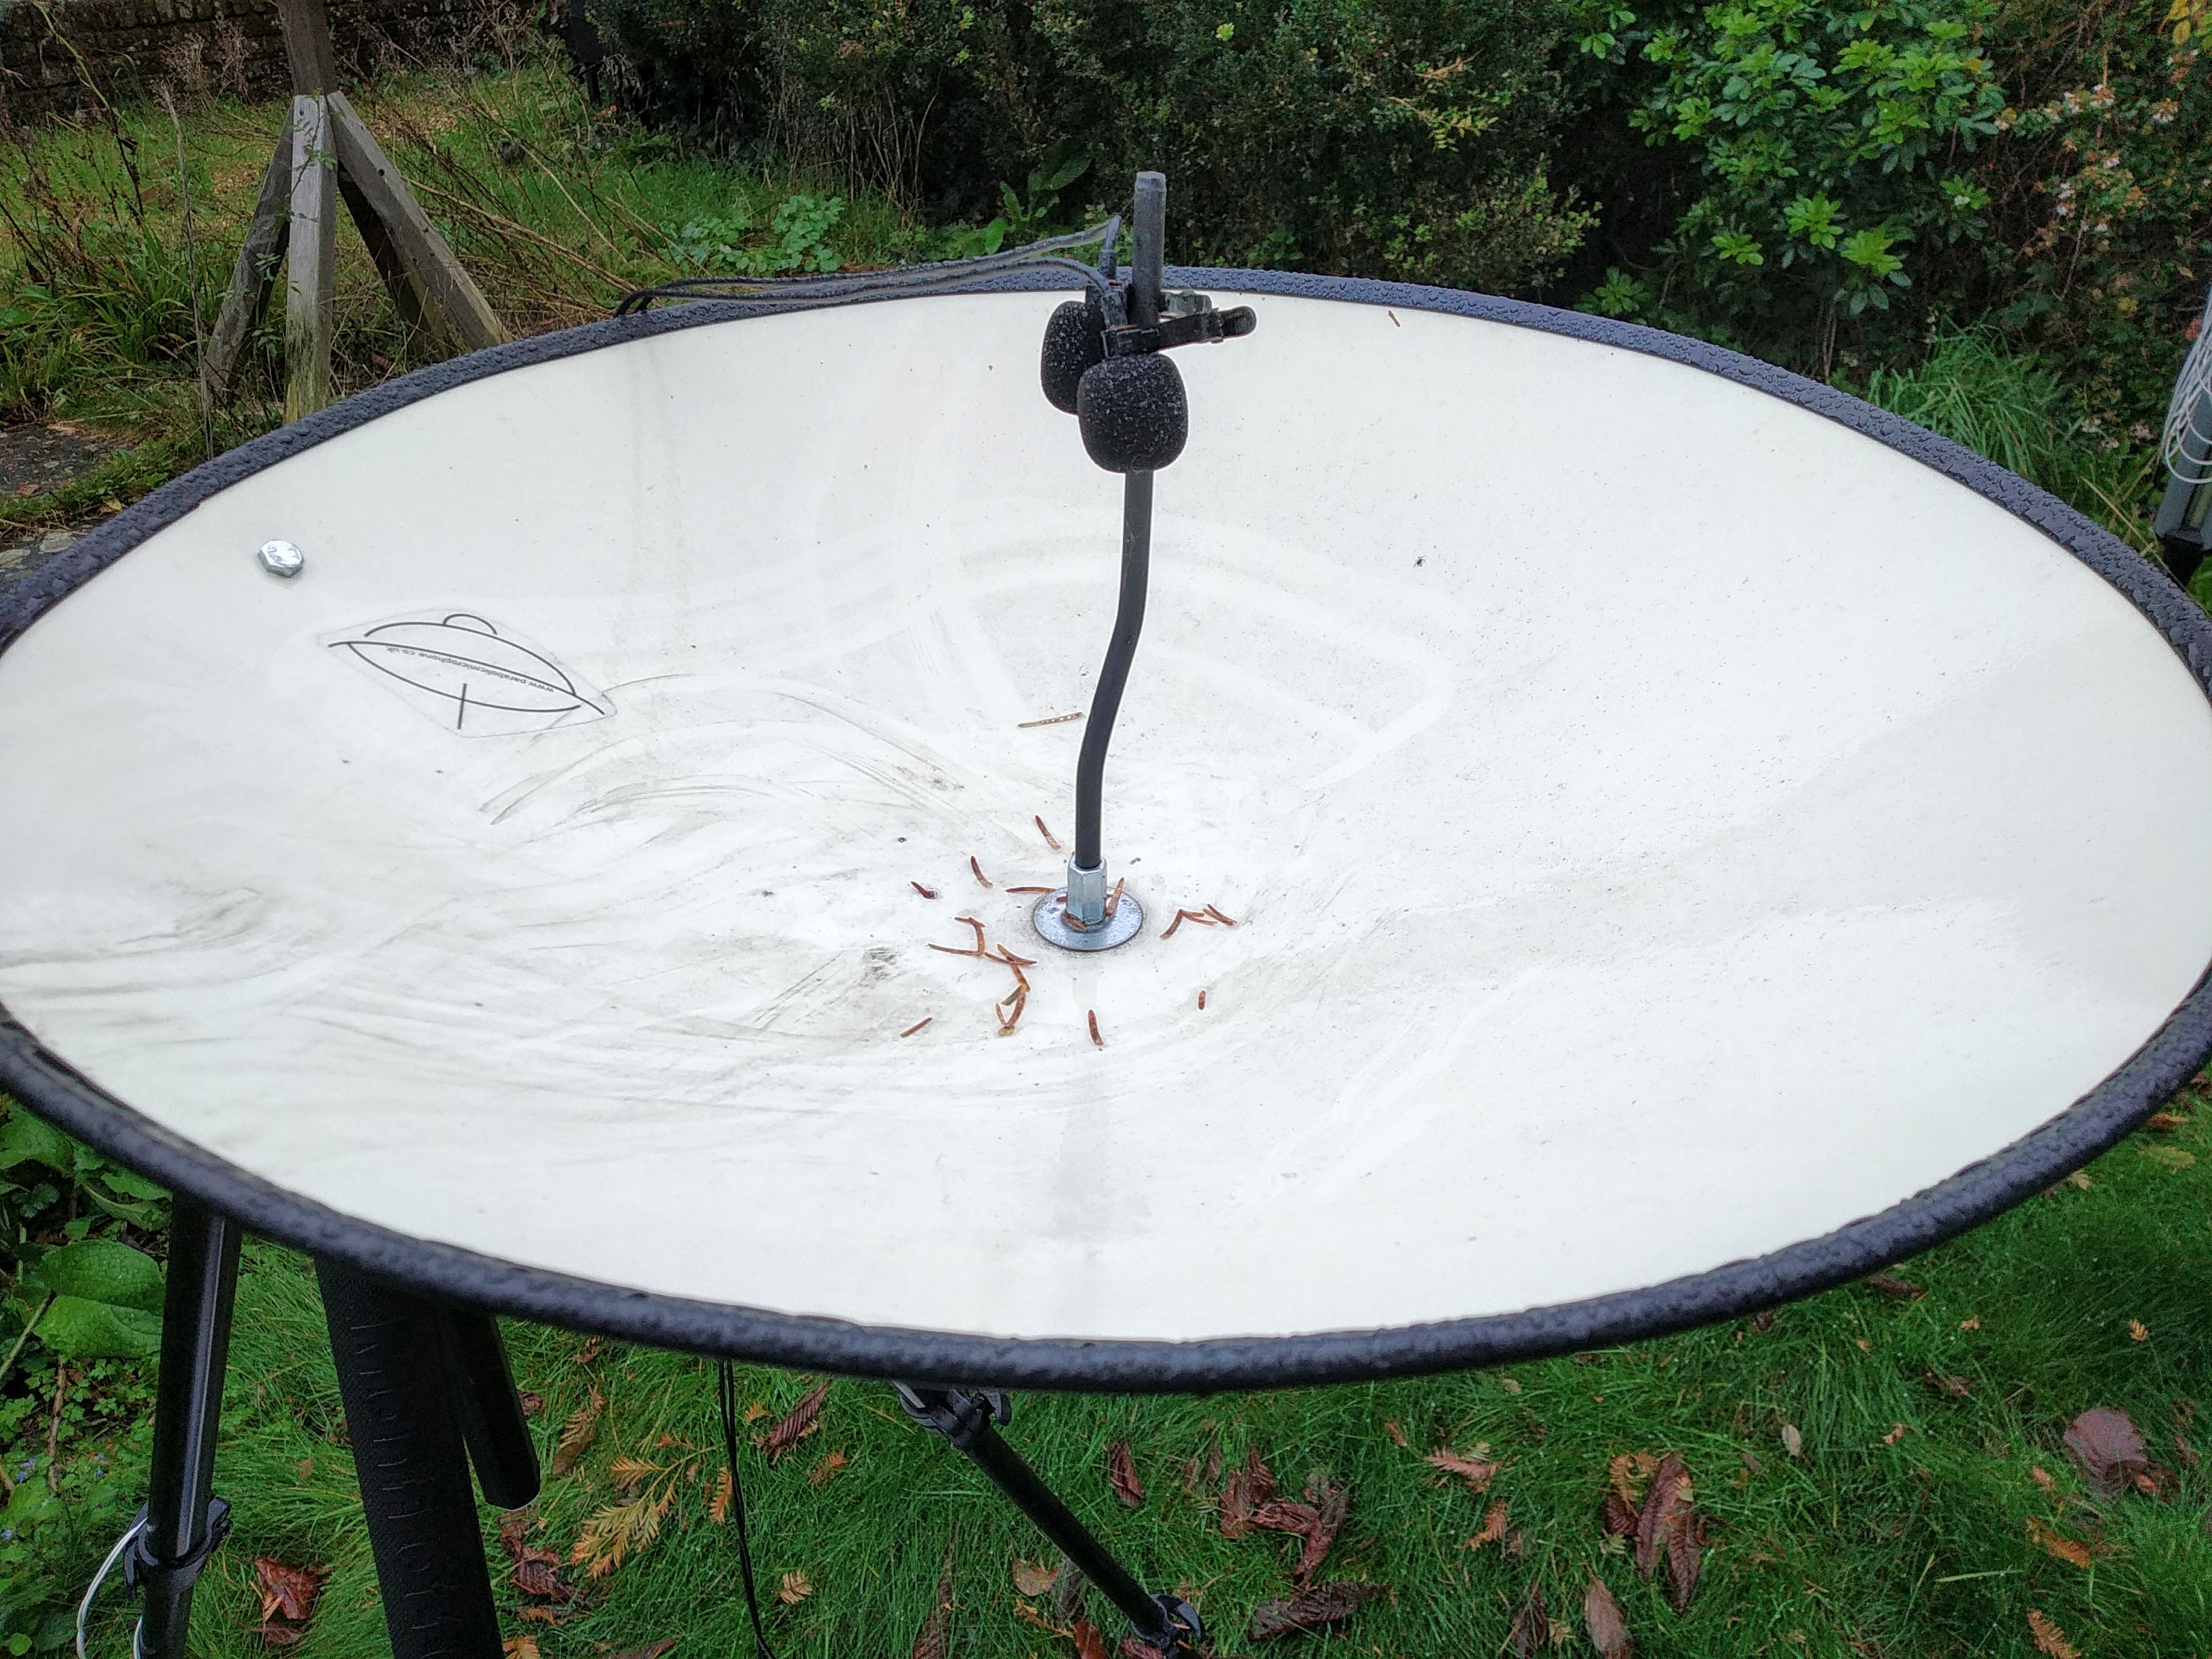 Parabolic dish with two microphones